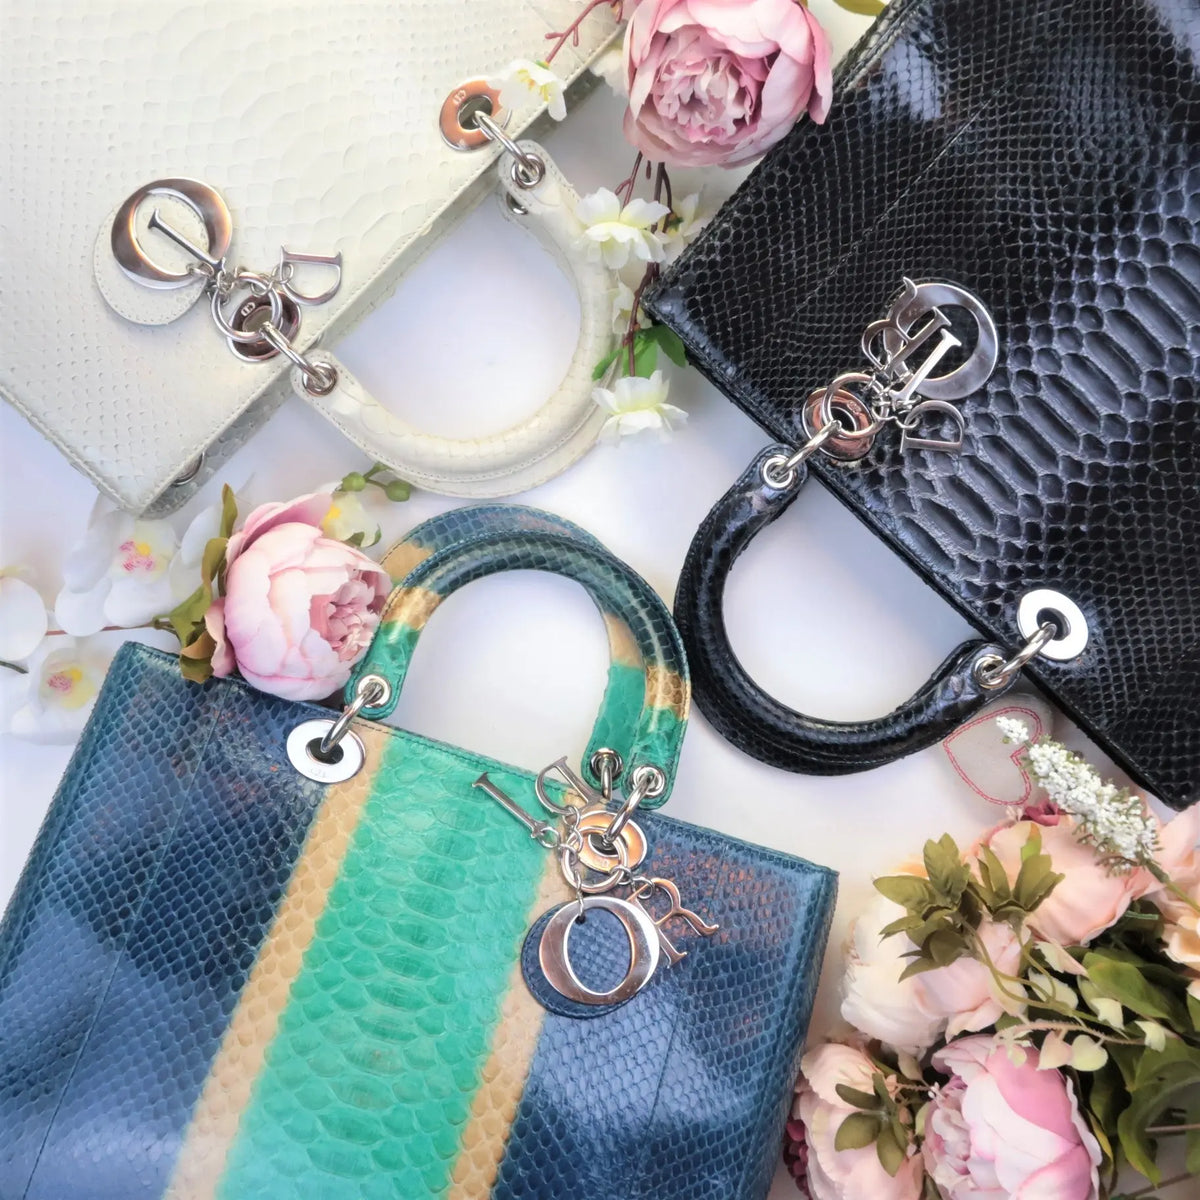 How to Authenticate a Dior bag with LOVEthatBAG - Westmount Fashionista